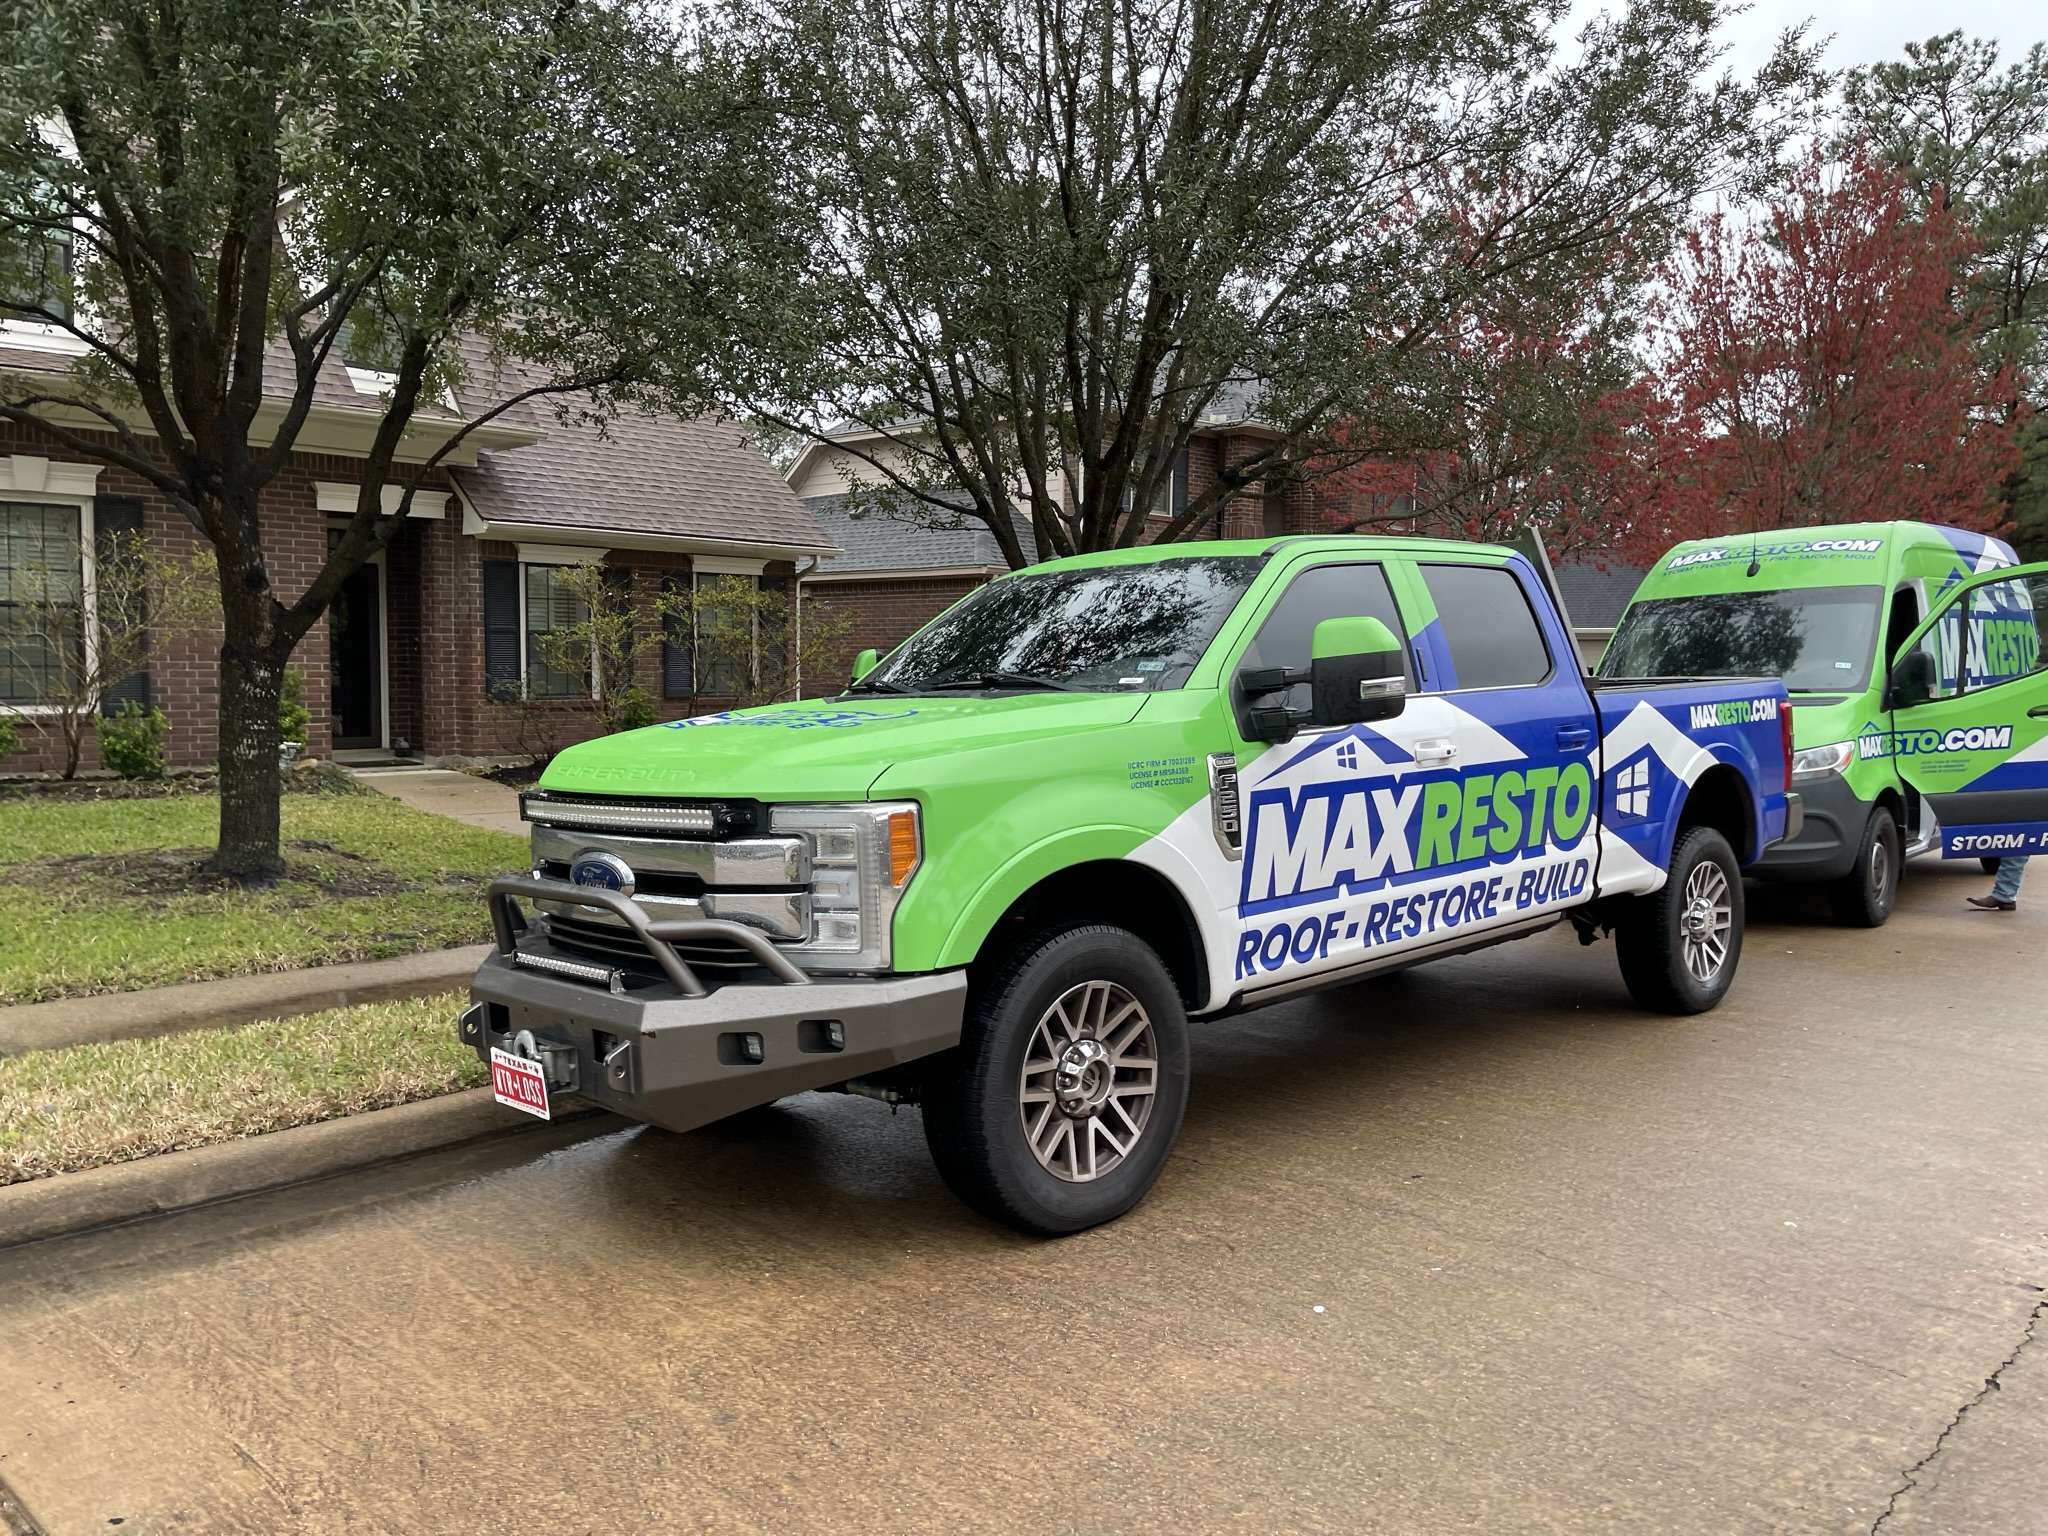 Water Damage Restoration & Repair Company, Water Damage MaxResto branded fleet vehicles parked in a residential area, showcasing the company's bold green and blue vehicle wrap design with the logo and services. Mitigation Service Water, Damage Restoration Service Tomball TX water damage restoration, Cypress storm recovery services, Spring TX fire damage repair, Harris County restoration company, Northwest Houston property restoration, Texas mold remediation contractor, Greater Houston area disaster response, The Woodlands emergency restoration services, Magnolia TX flood damage repair, Katy area residential restoration services. Water Damage Restoration in Spring TX Water Damage Repair Water Damage Repair Services in Spring TX Water Damage Restoration Water Damage Restoration Near Me Local Water Damage Repair Water Damage Restoration Service Water Mitigation Services Water Damage Restoration Company Water Restoration Service Provider